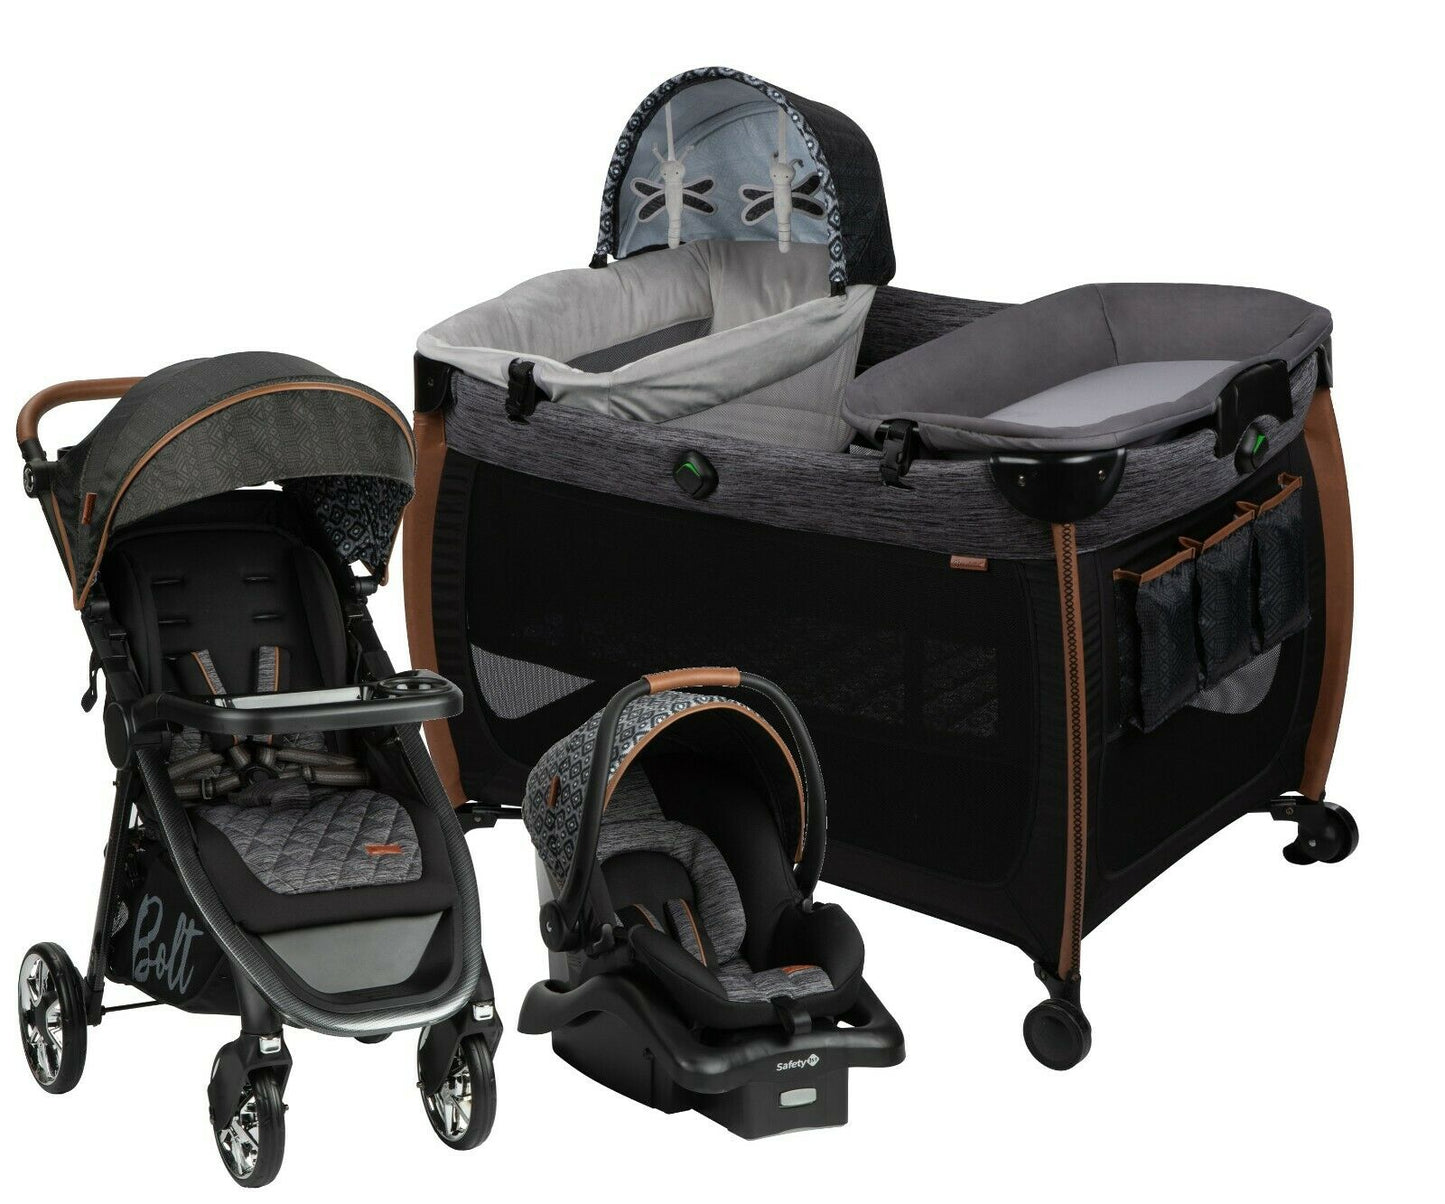 Baby Stroller Travel System with Car Seat Infant Playard Crib Combo Set-Black